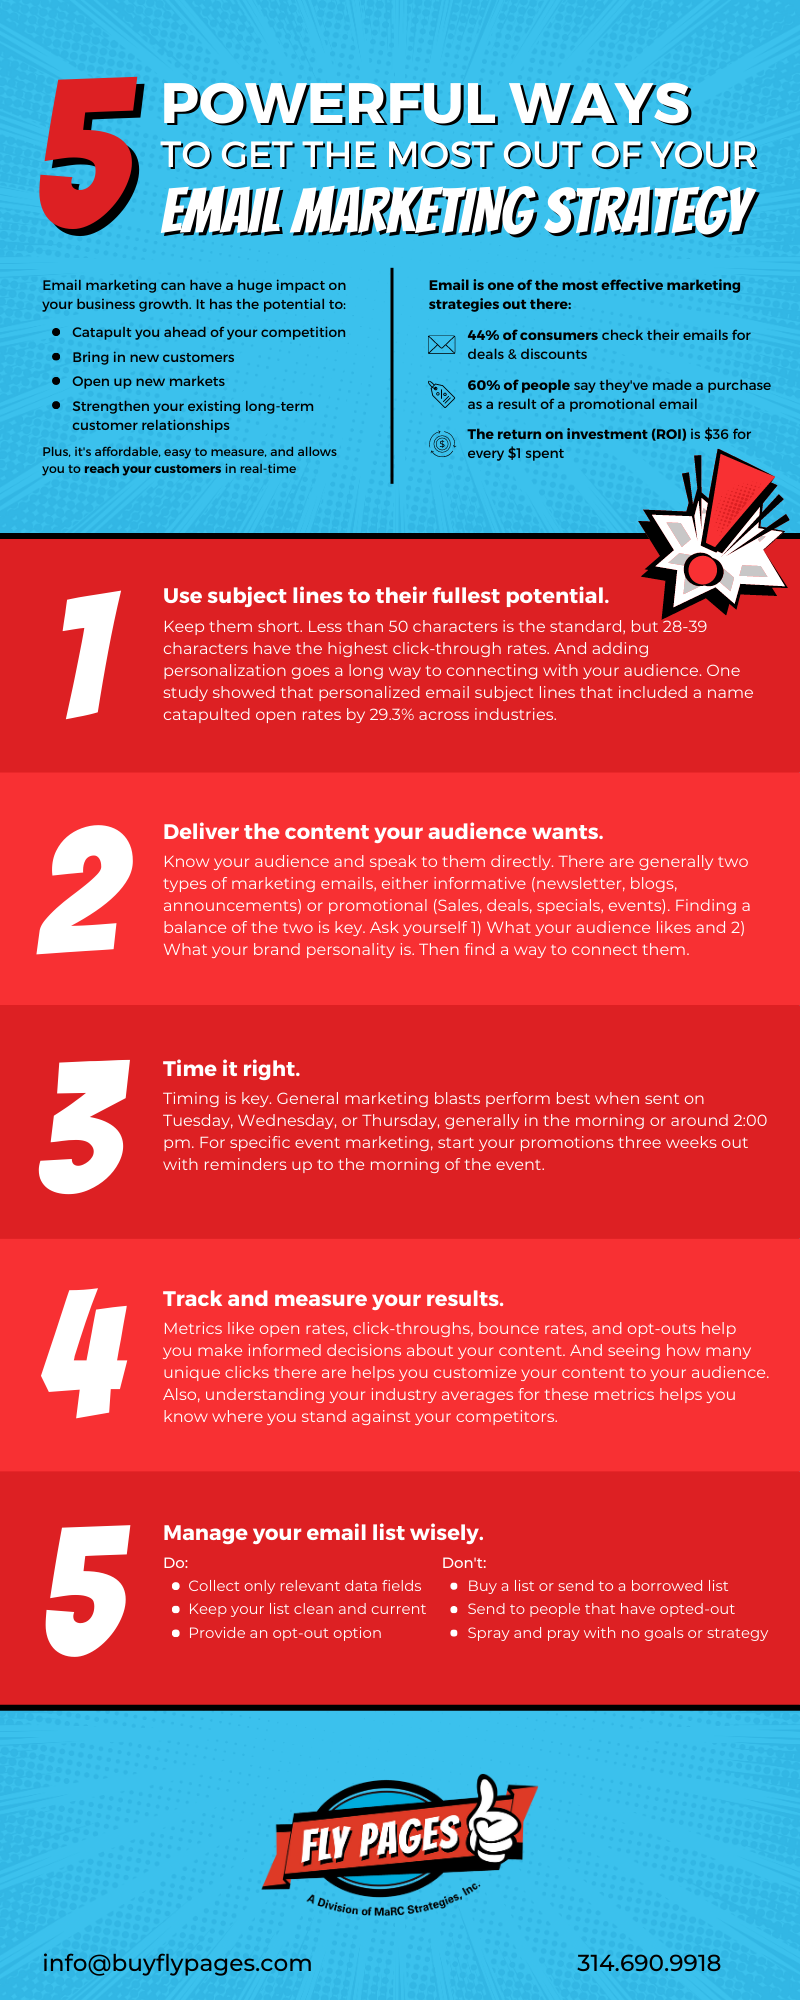 Supercharge your Email Marketing Strategy [An Infographic]